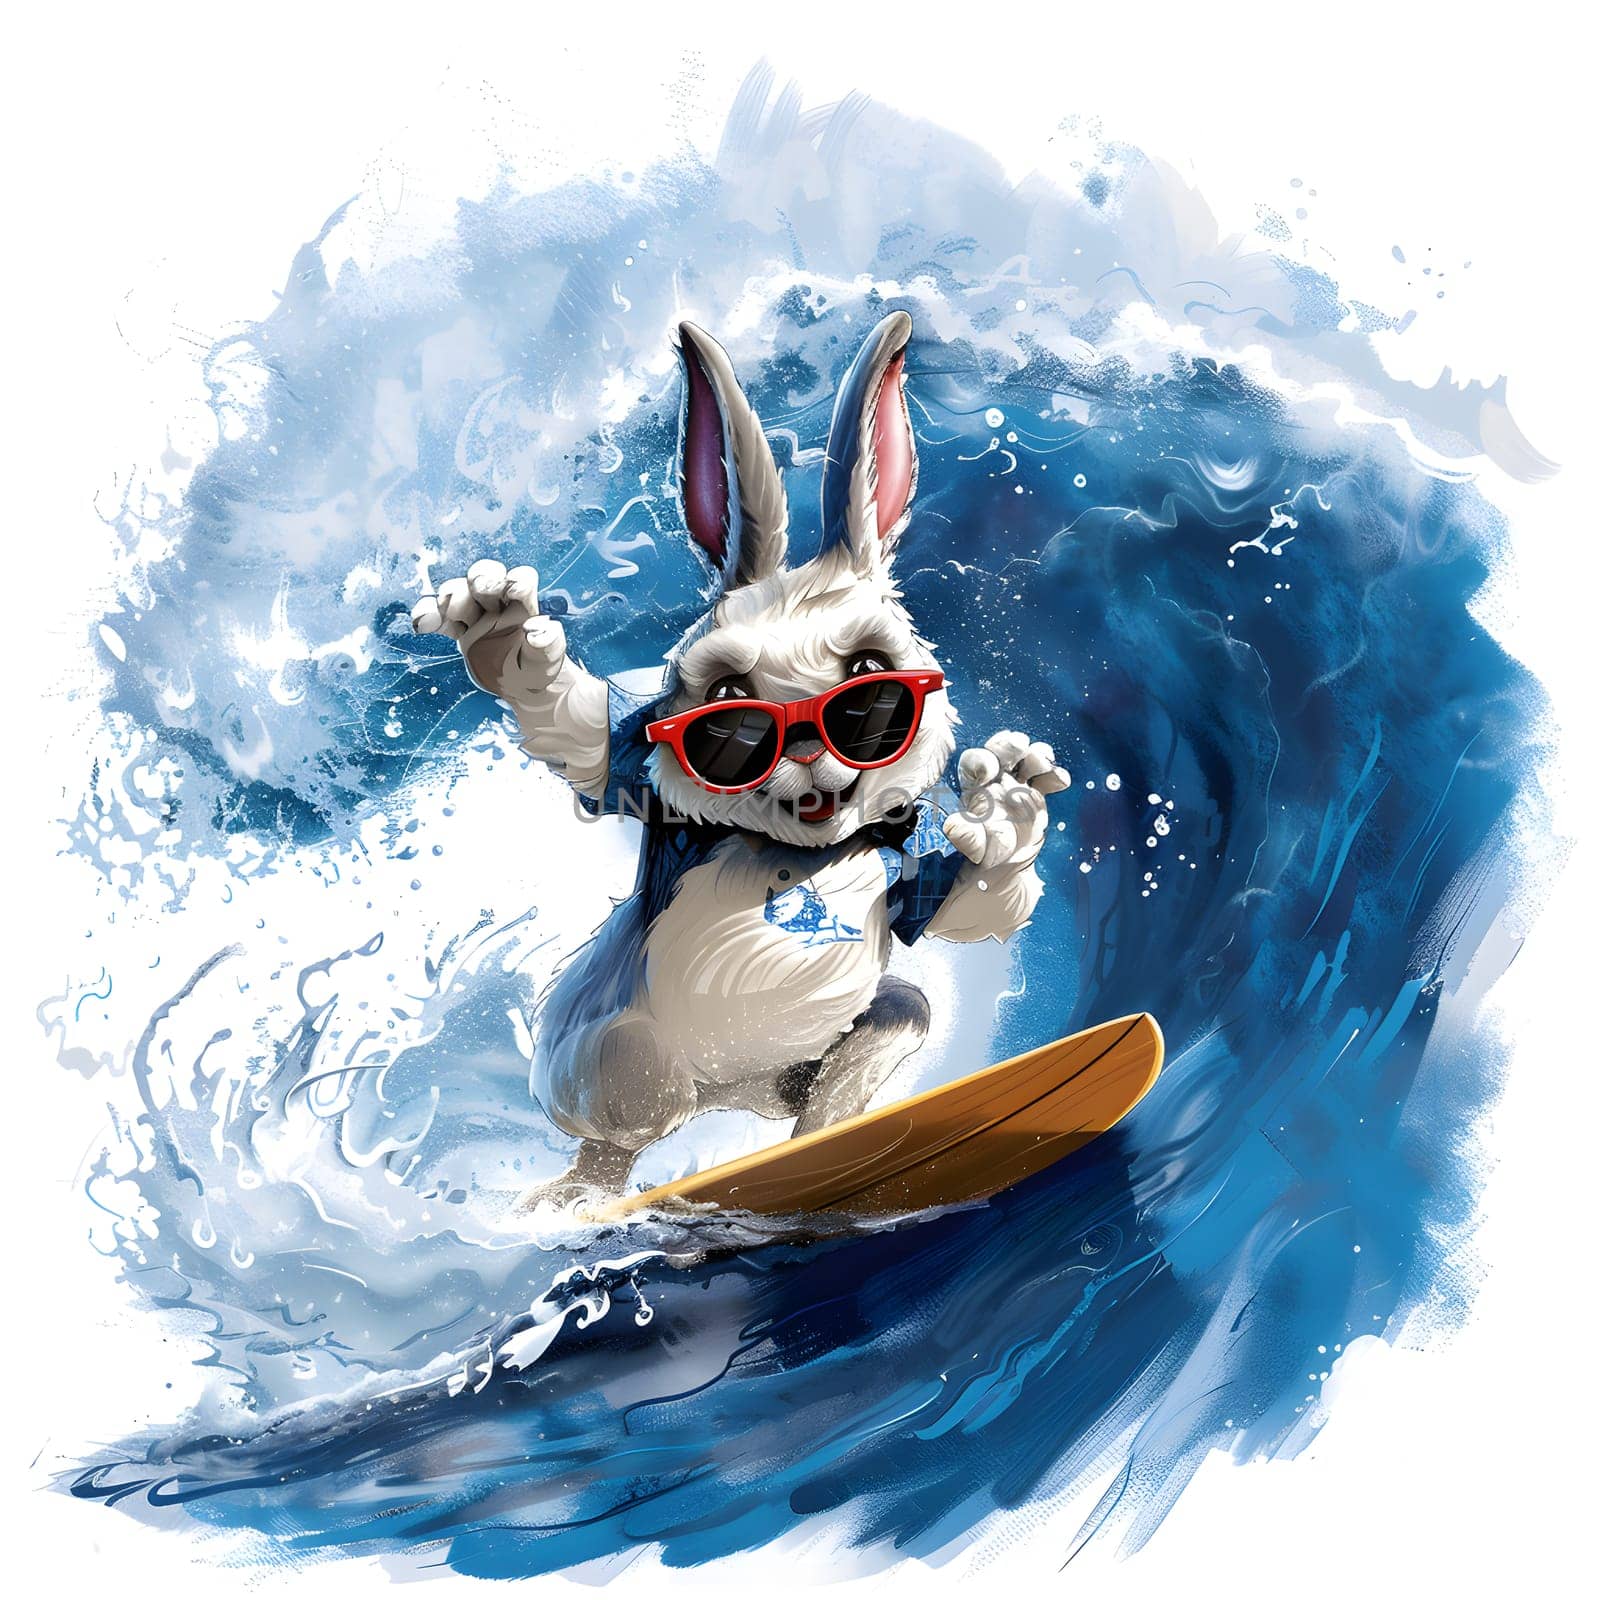 A happy rabbit, a vertebrate carnivore, is surfing a wind wave while wearing sunglasses. This illustration displays the recreation of water sports in an artistic painting